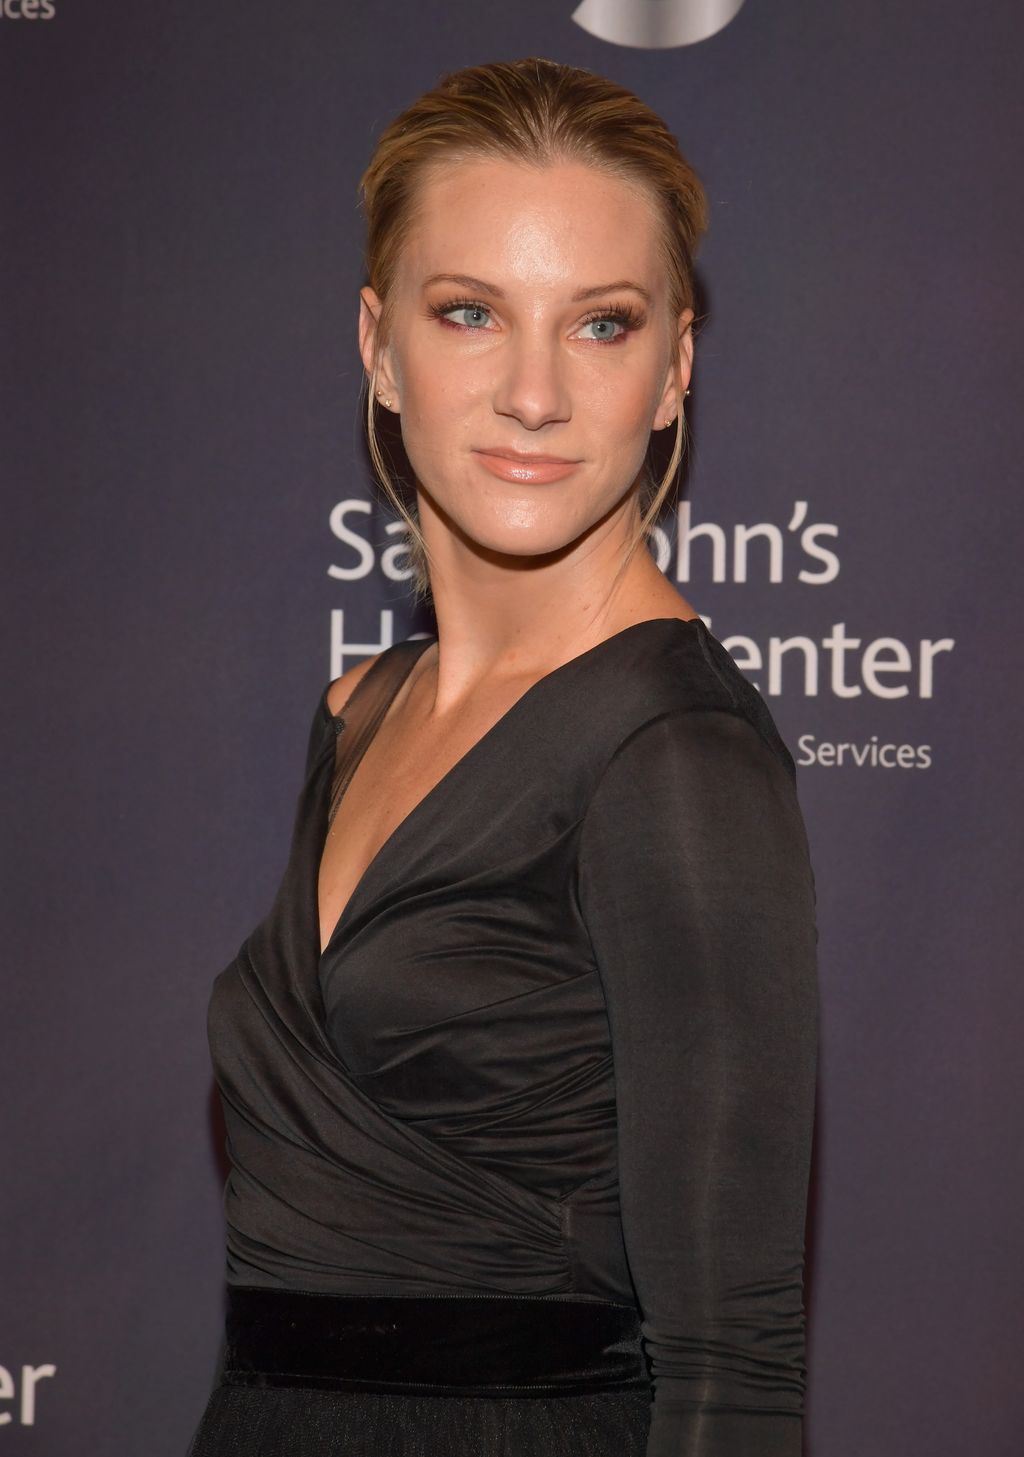 CULVER CITY, CA - OCTOBER 21:  Heather Morris attends the Saint John's Health Center 75th Anniversary Gala Celebration on October 21, 2017 in Culver City, California.  (Photo by Lester Cohen/Getty Images for Saint John's Health Center Foundation)